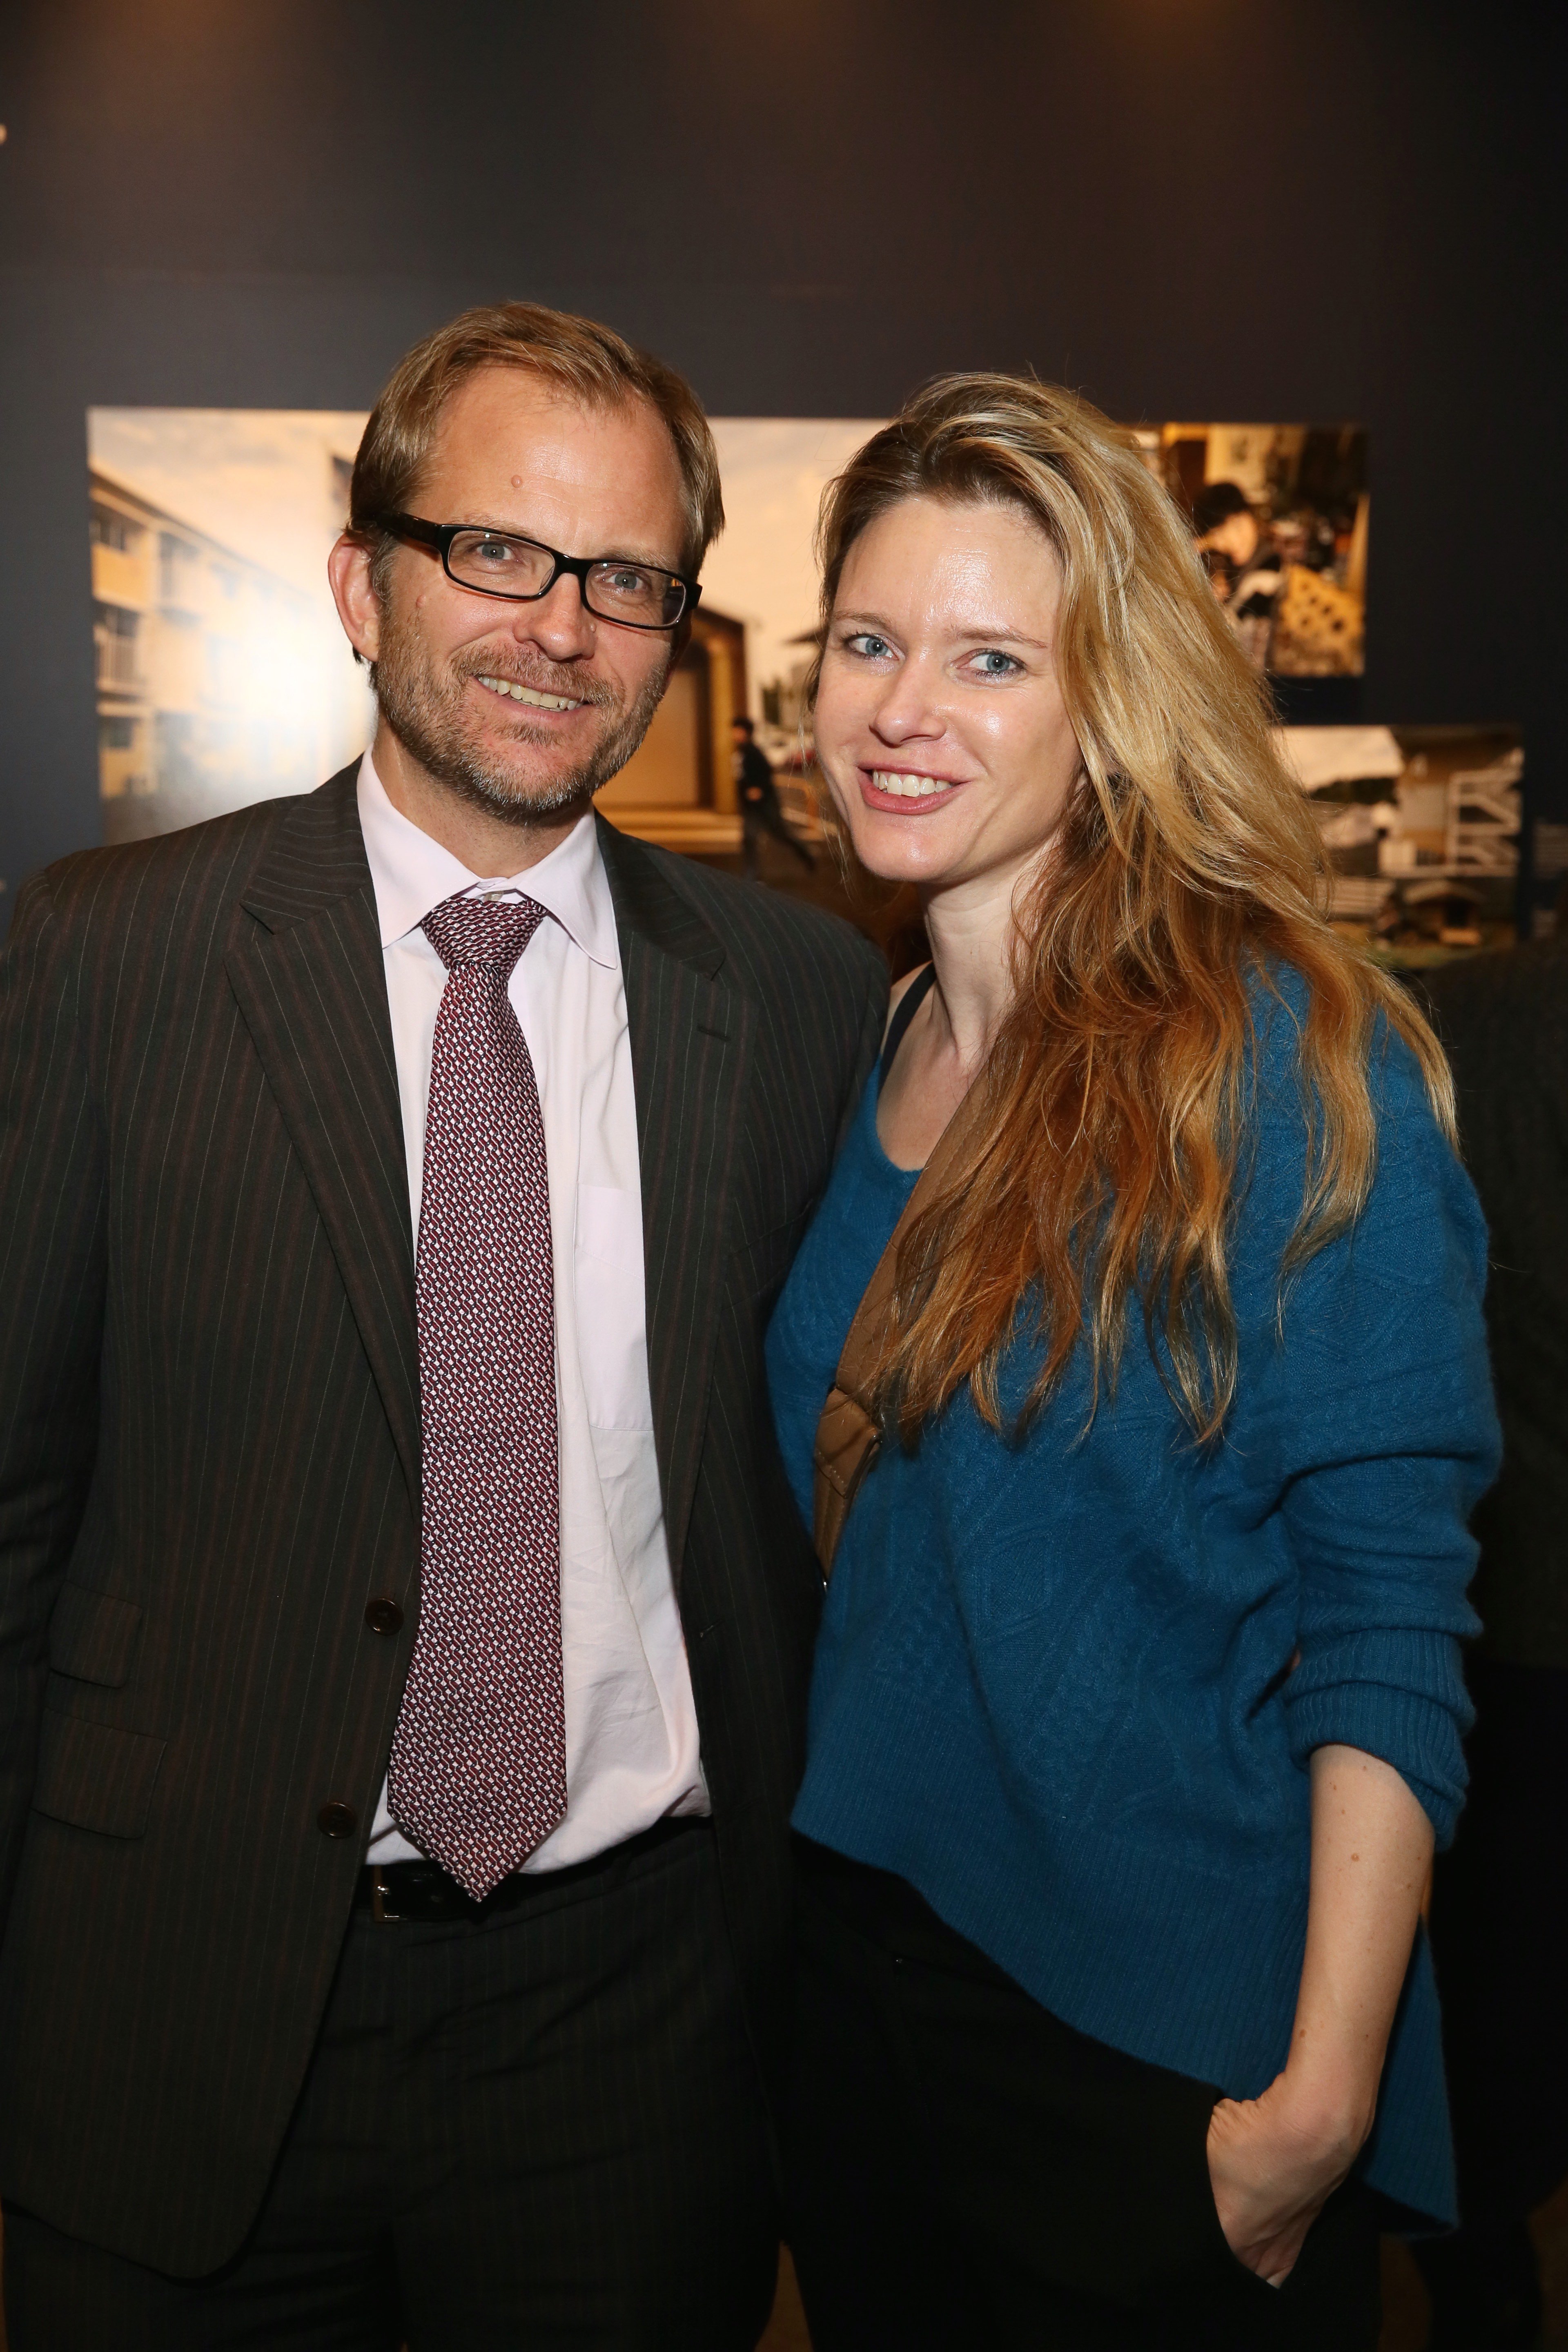 Matt Petersen and Justine Musk pose at the Annenberg Space for Photography Opening Reception for "Sink or Swim: Designing for a Sea Change" at the Annenberg Space for Photography on December 11, 2014, in Los Angeles, California | Source: Getty Images